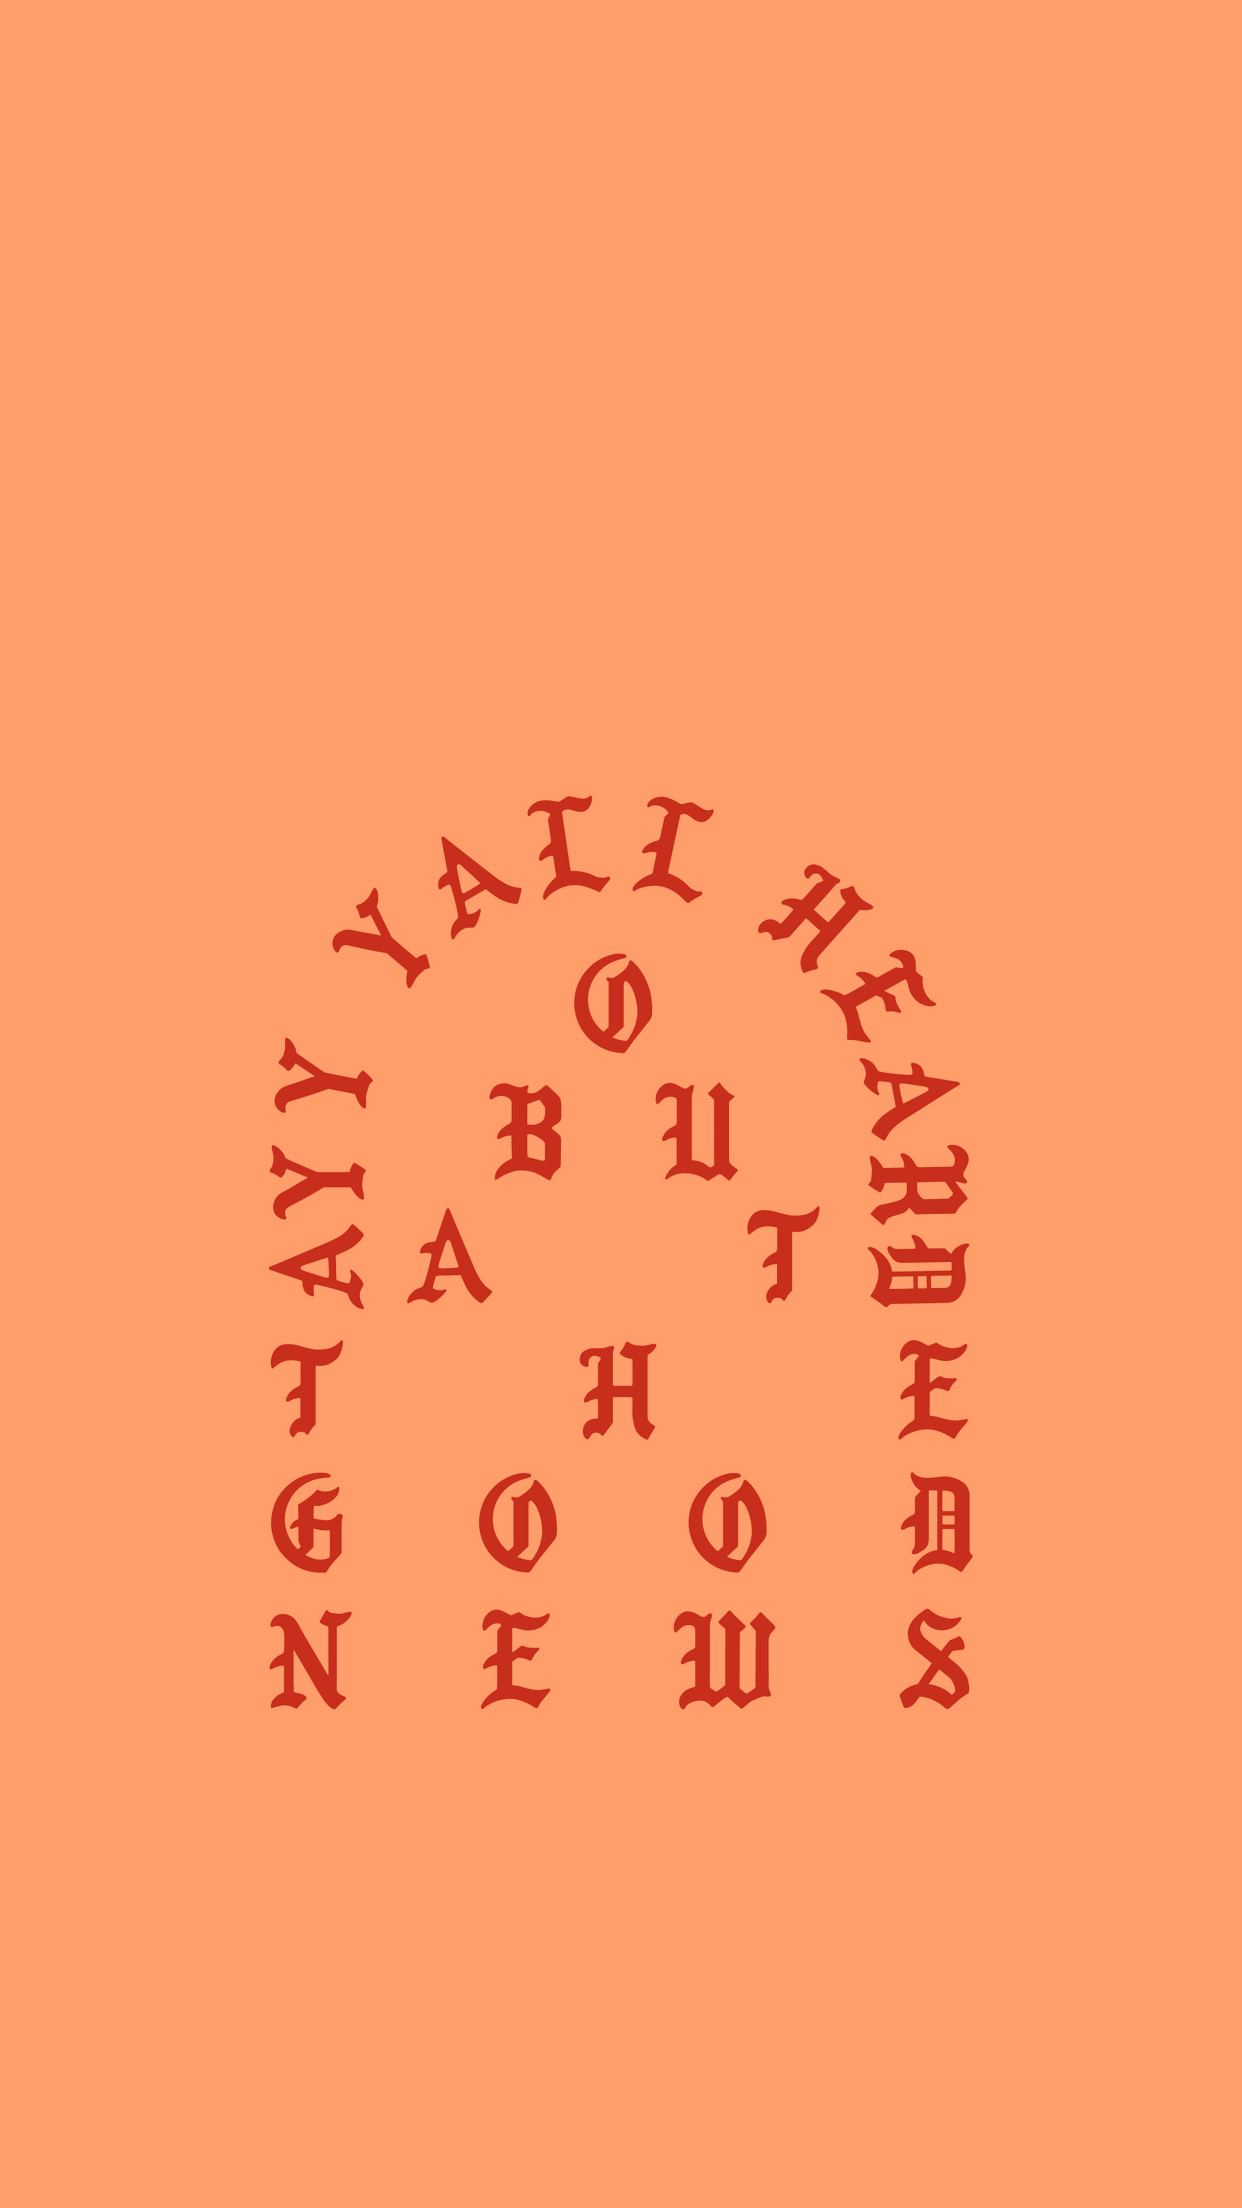 1242x2208 Iphone Wallpaper, Kanye West, Drake, Definitions, Sticker, Menswear,  Sayings, Colours, Music